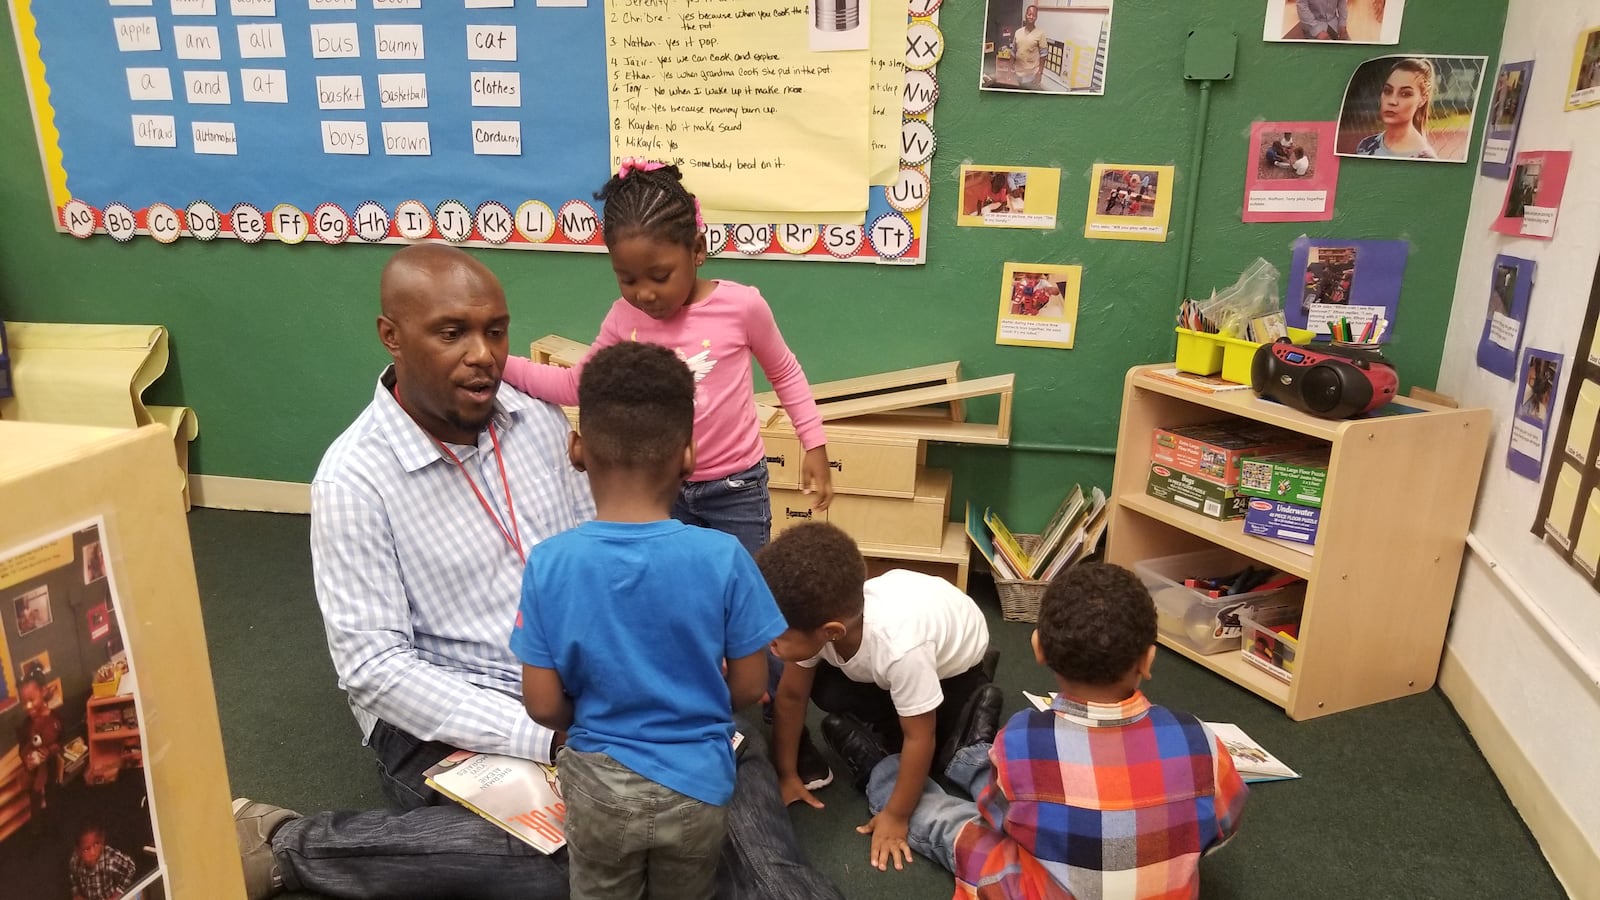 Lee Tate is a master's level teacher who is popular among students at a Chicago Child Care Society in Hyde Park.